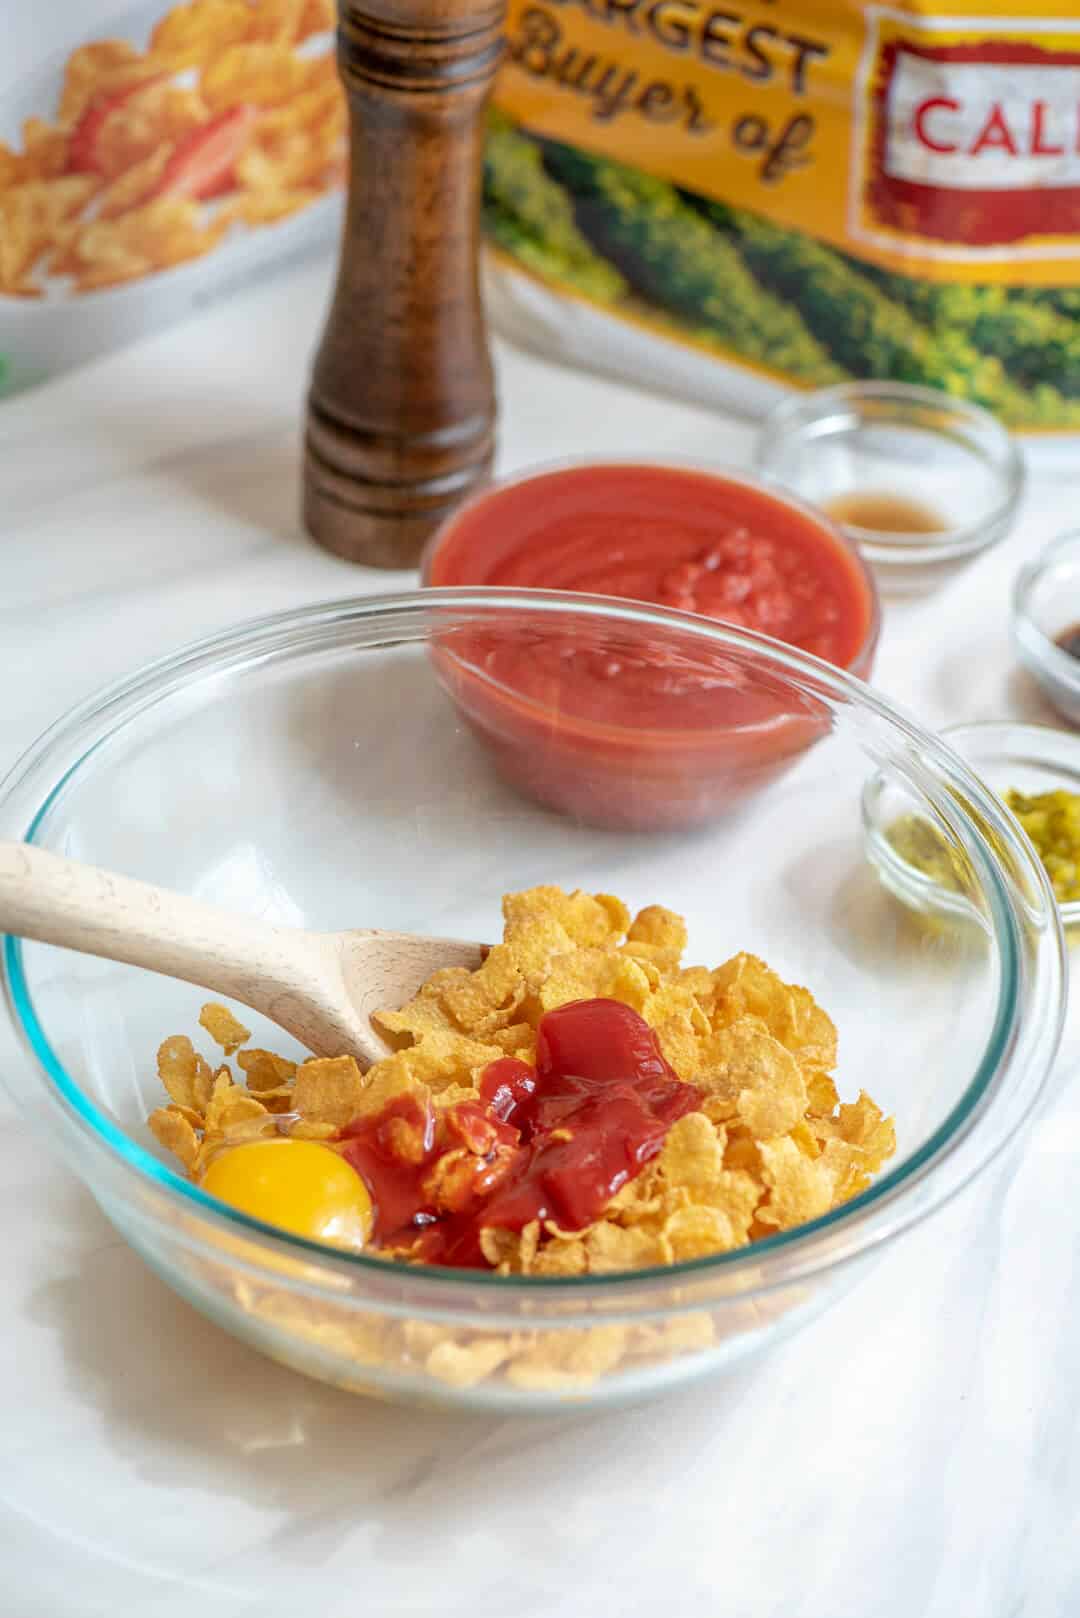 An in process image that shows the cornflakes being combined with ketchup and an egg in a glass bowl.